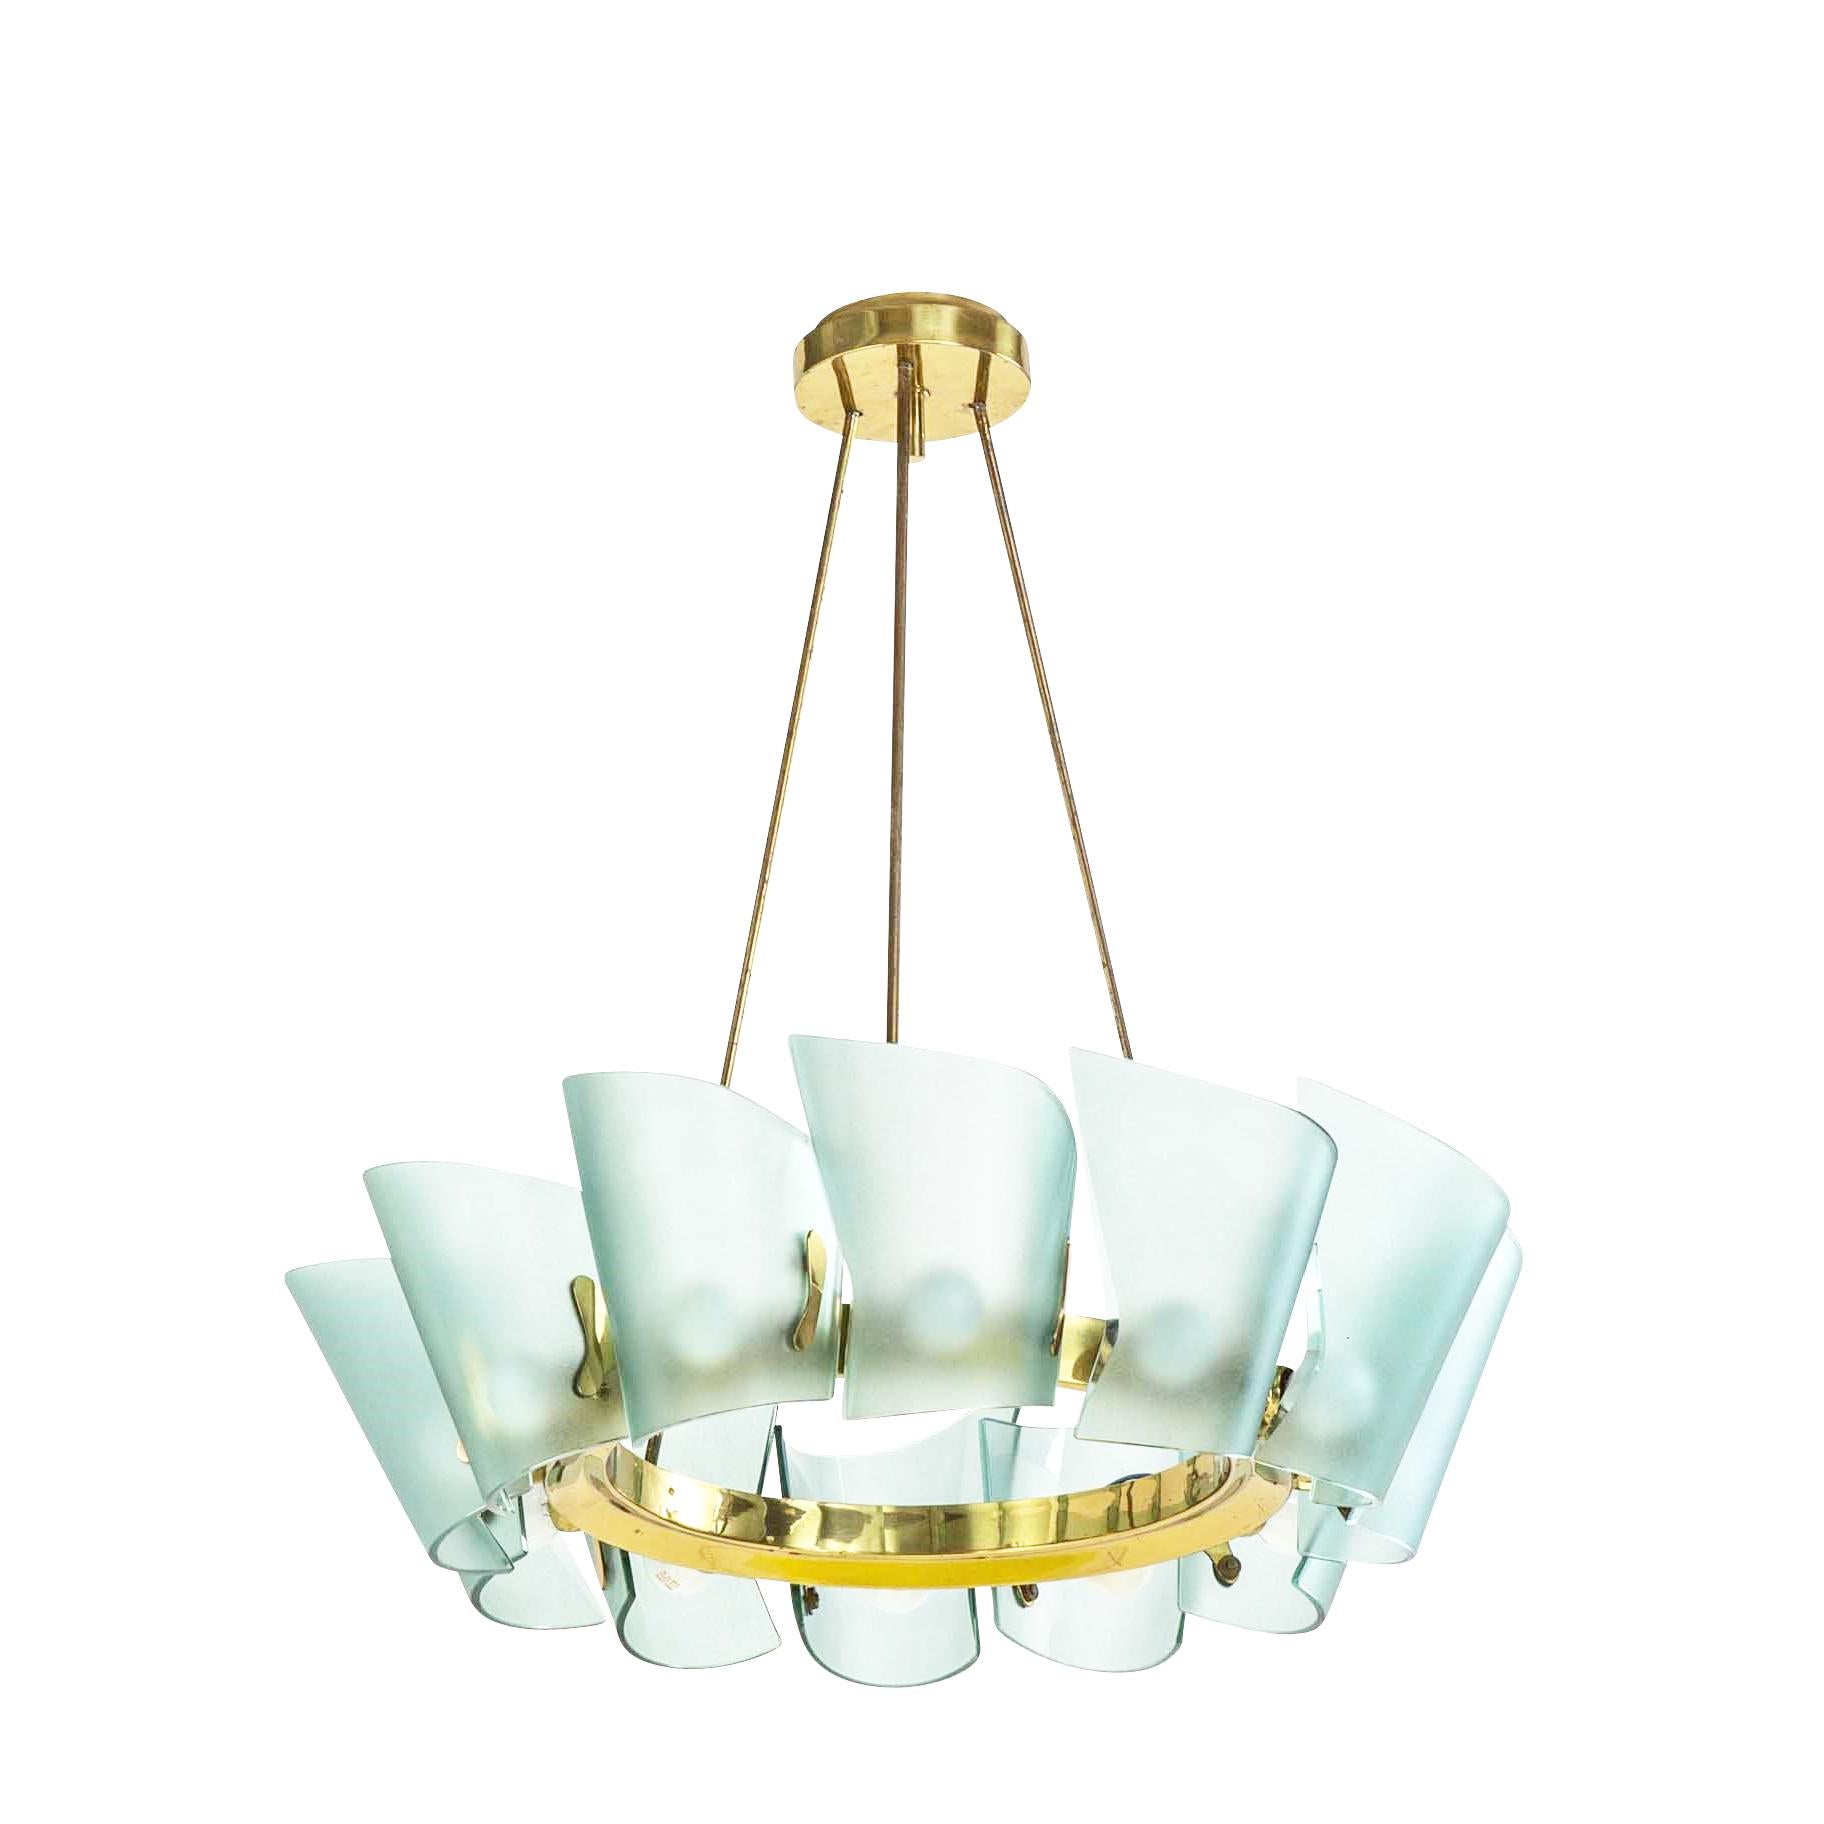 Stunning 1960s chandelier designed by Max Ingrand for Fontana Arte featuring twelve acqua colored glasses on a brass frame. Each glass is of the highest quality with beveled edges and a satin finish.

Condition: Excellent vintage condition, minor